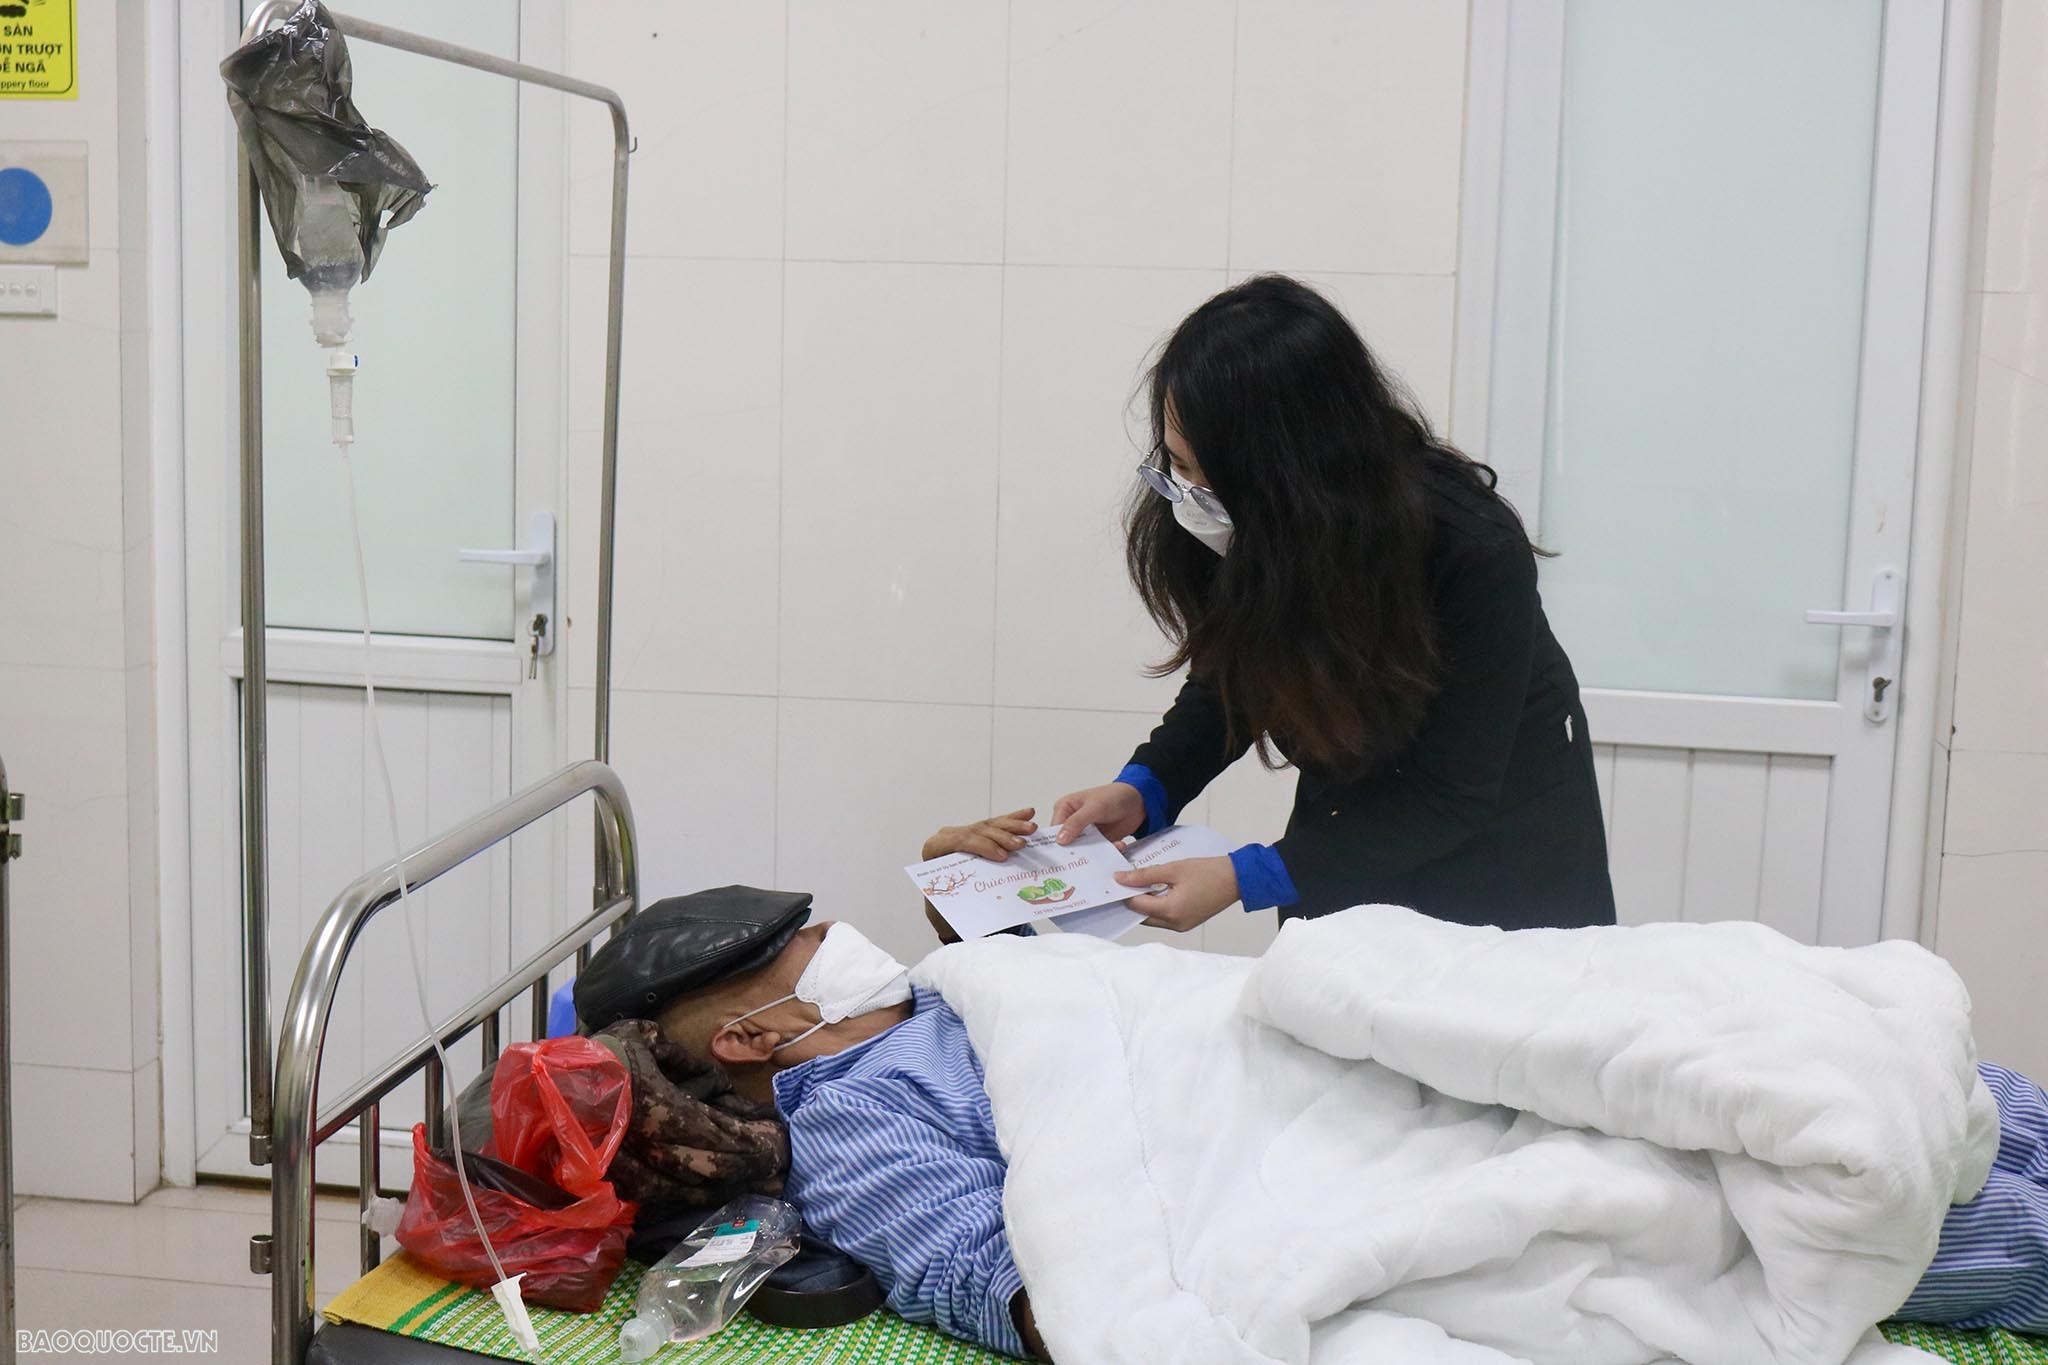 Hanoi to build 10 new hospitals by 2025 to guarantee healthcare for its population